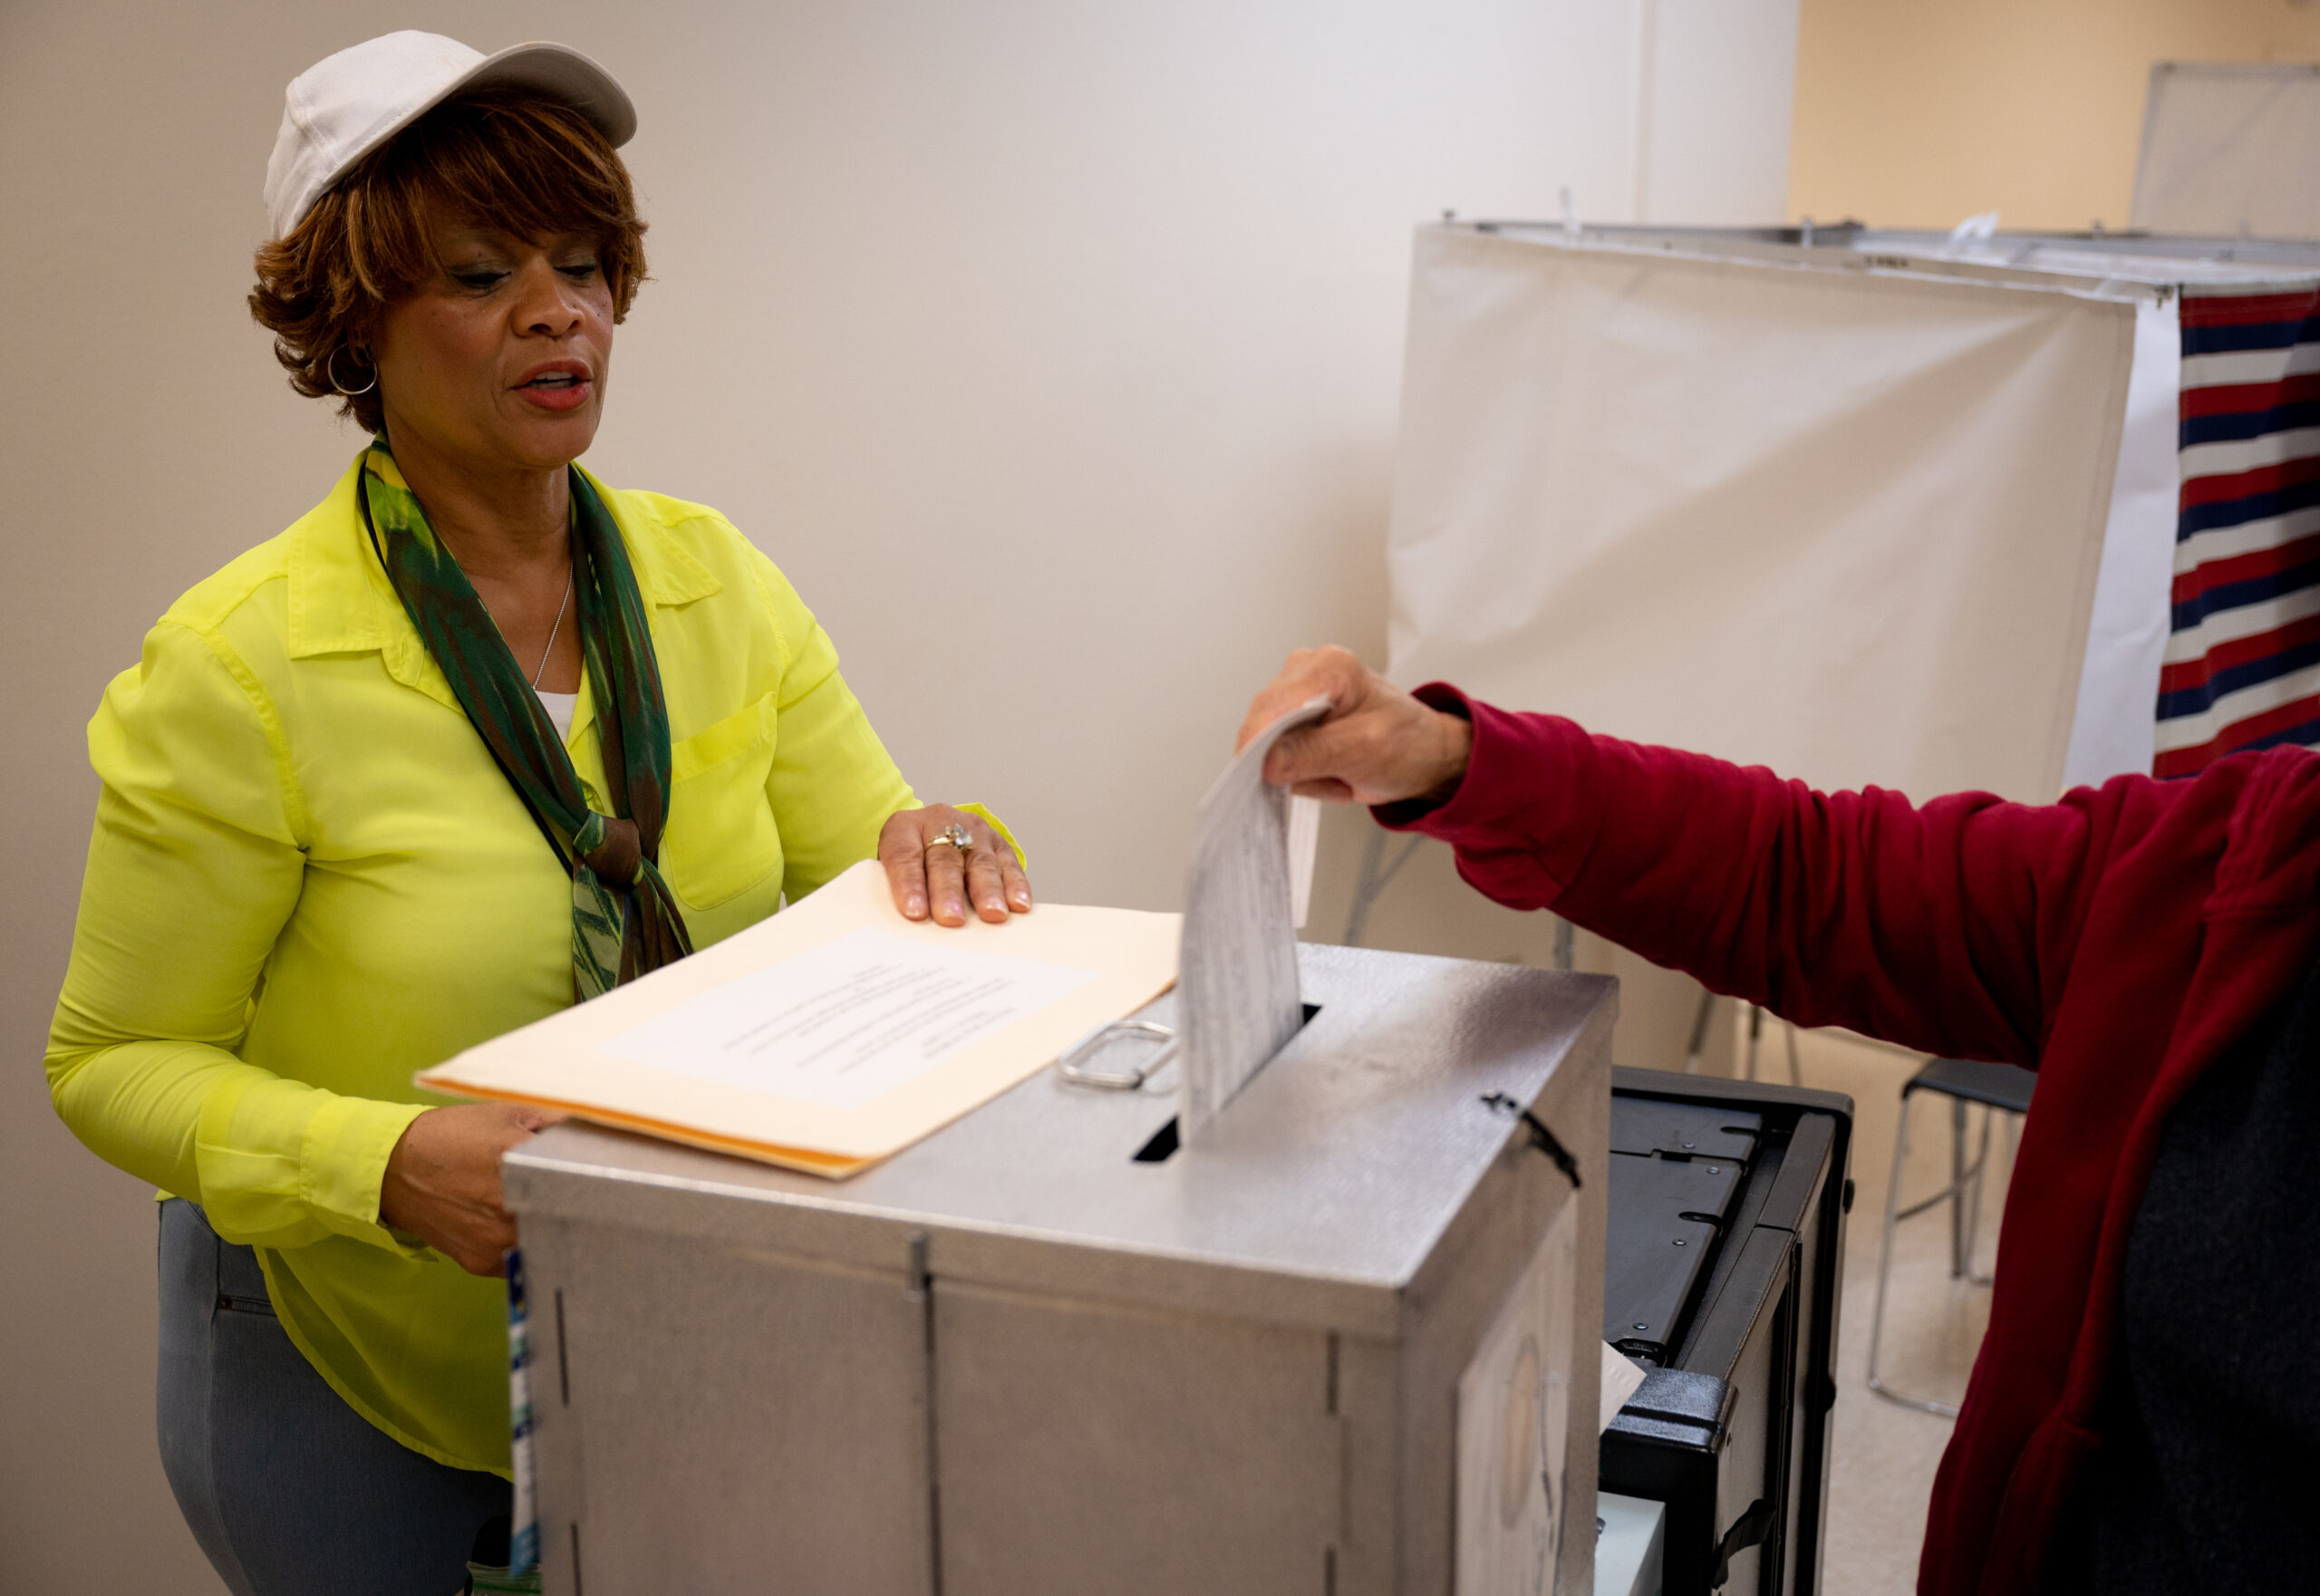 A woman in a yellow shirt stands by a silver voting box.